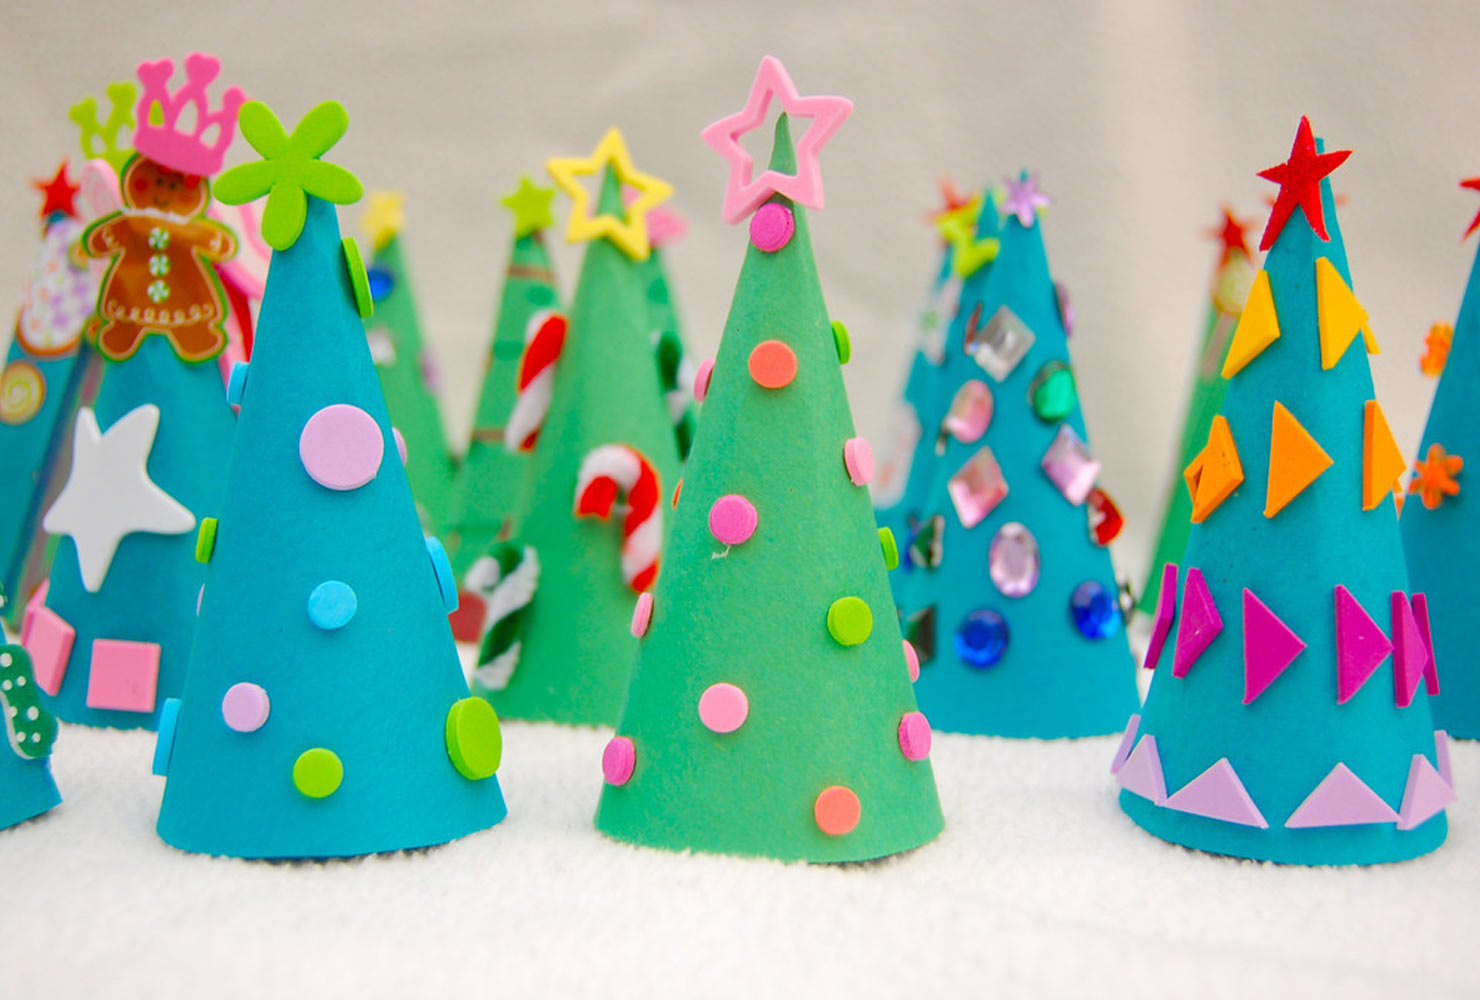  variety of paper Christmas trees